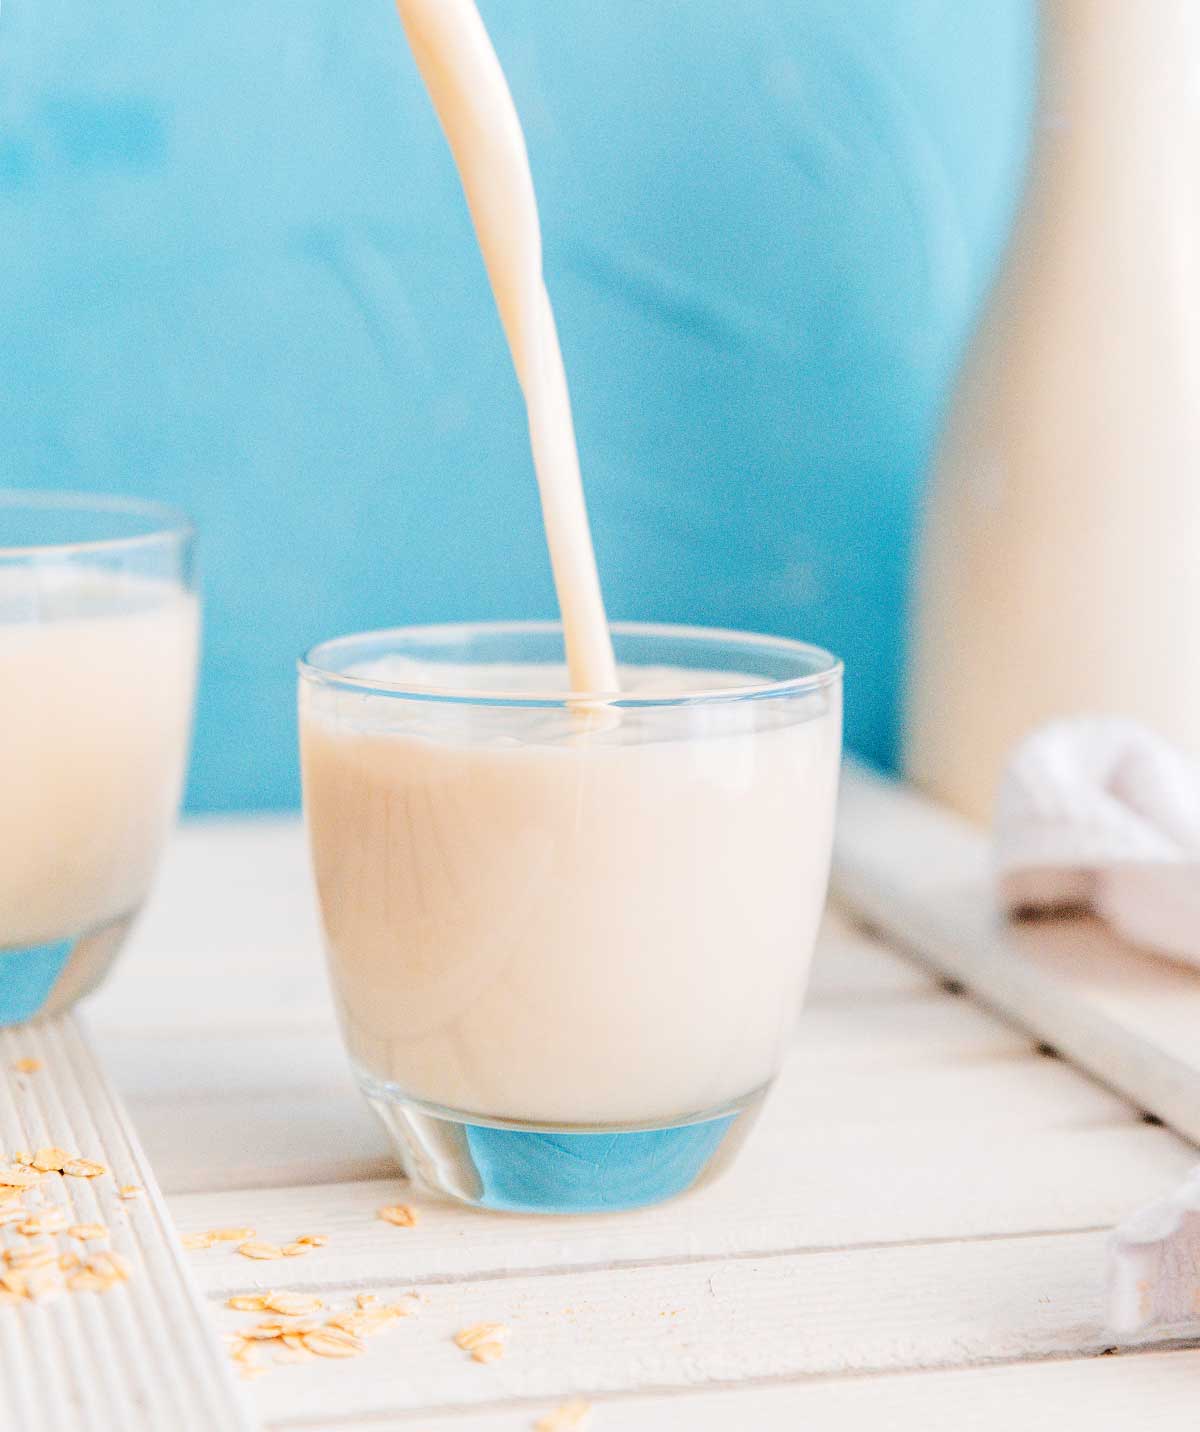 Oat milk being poured in a cup.